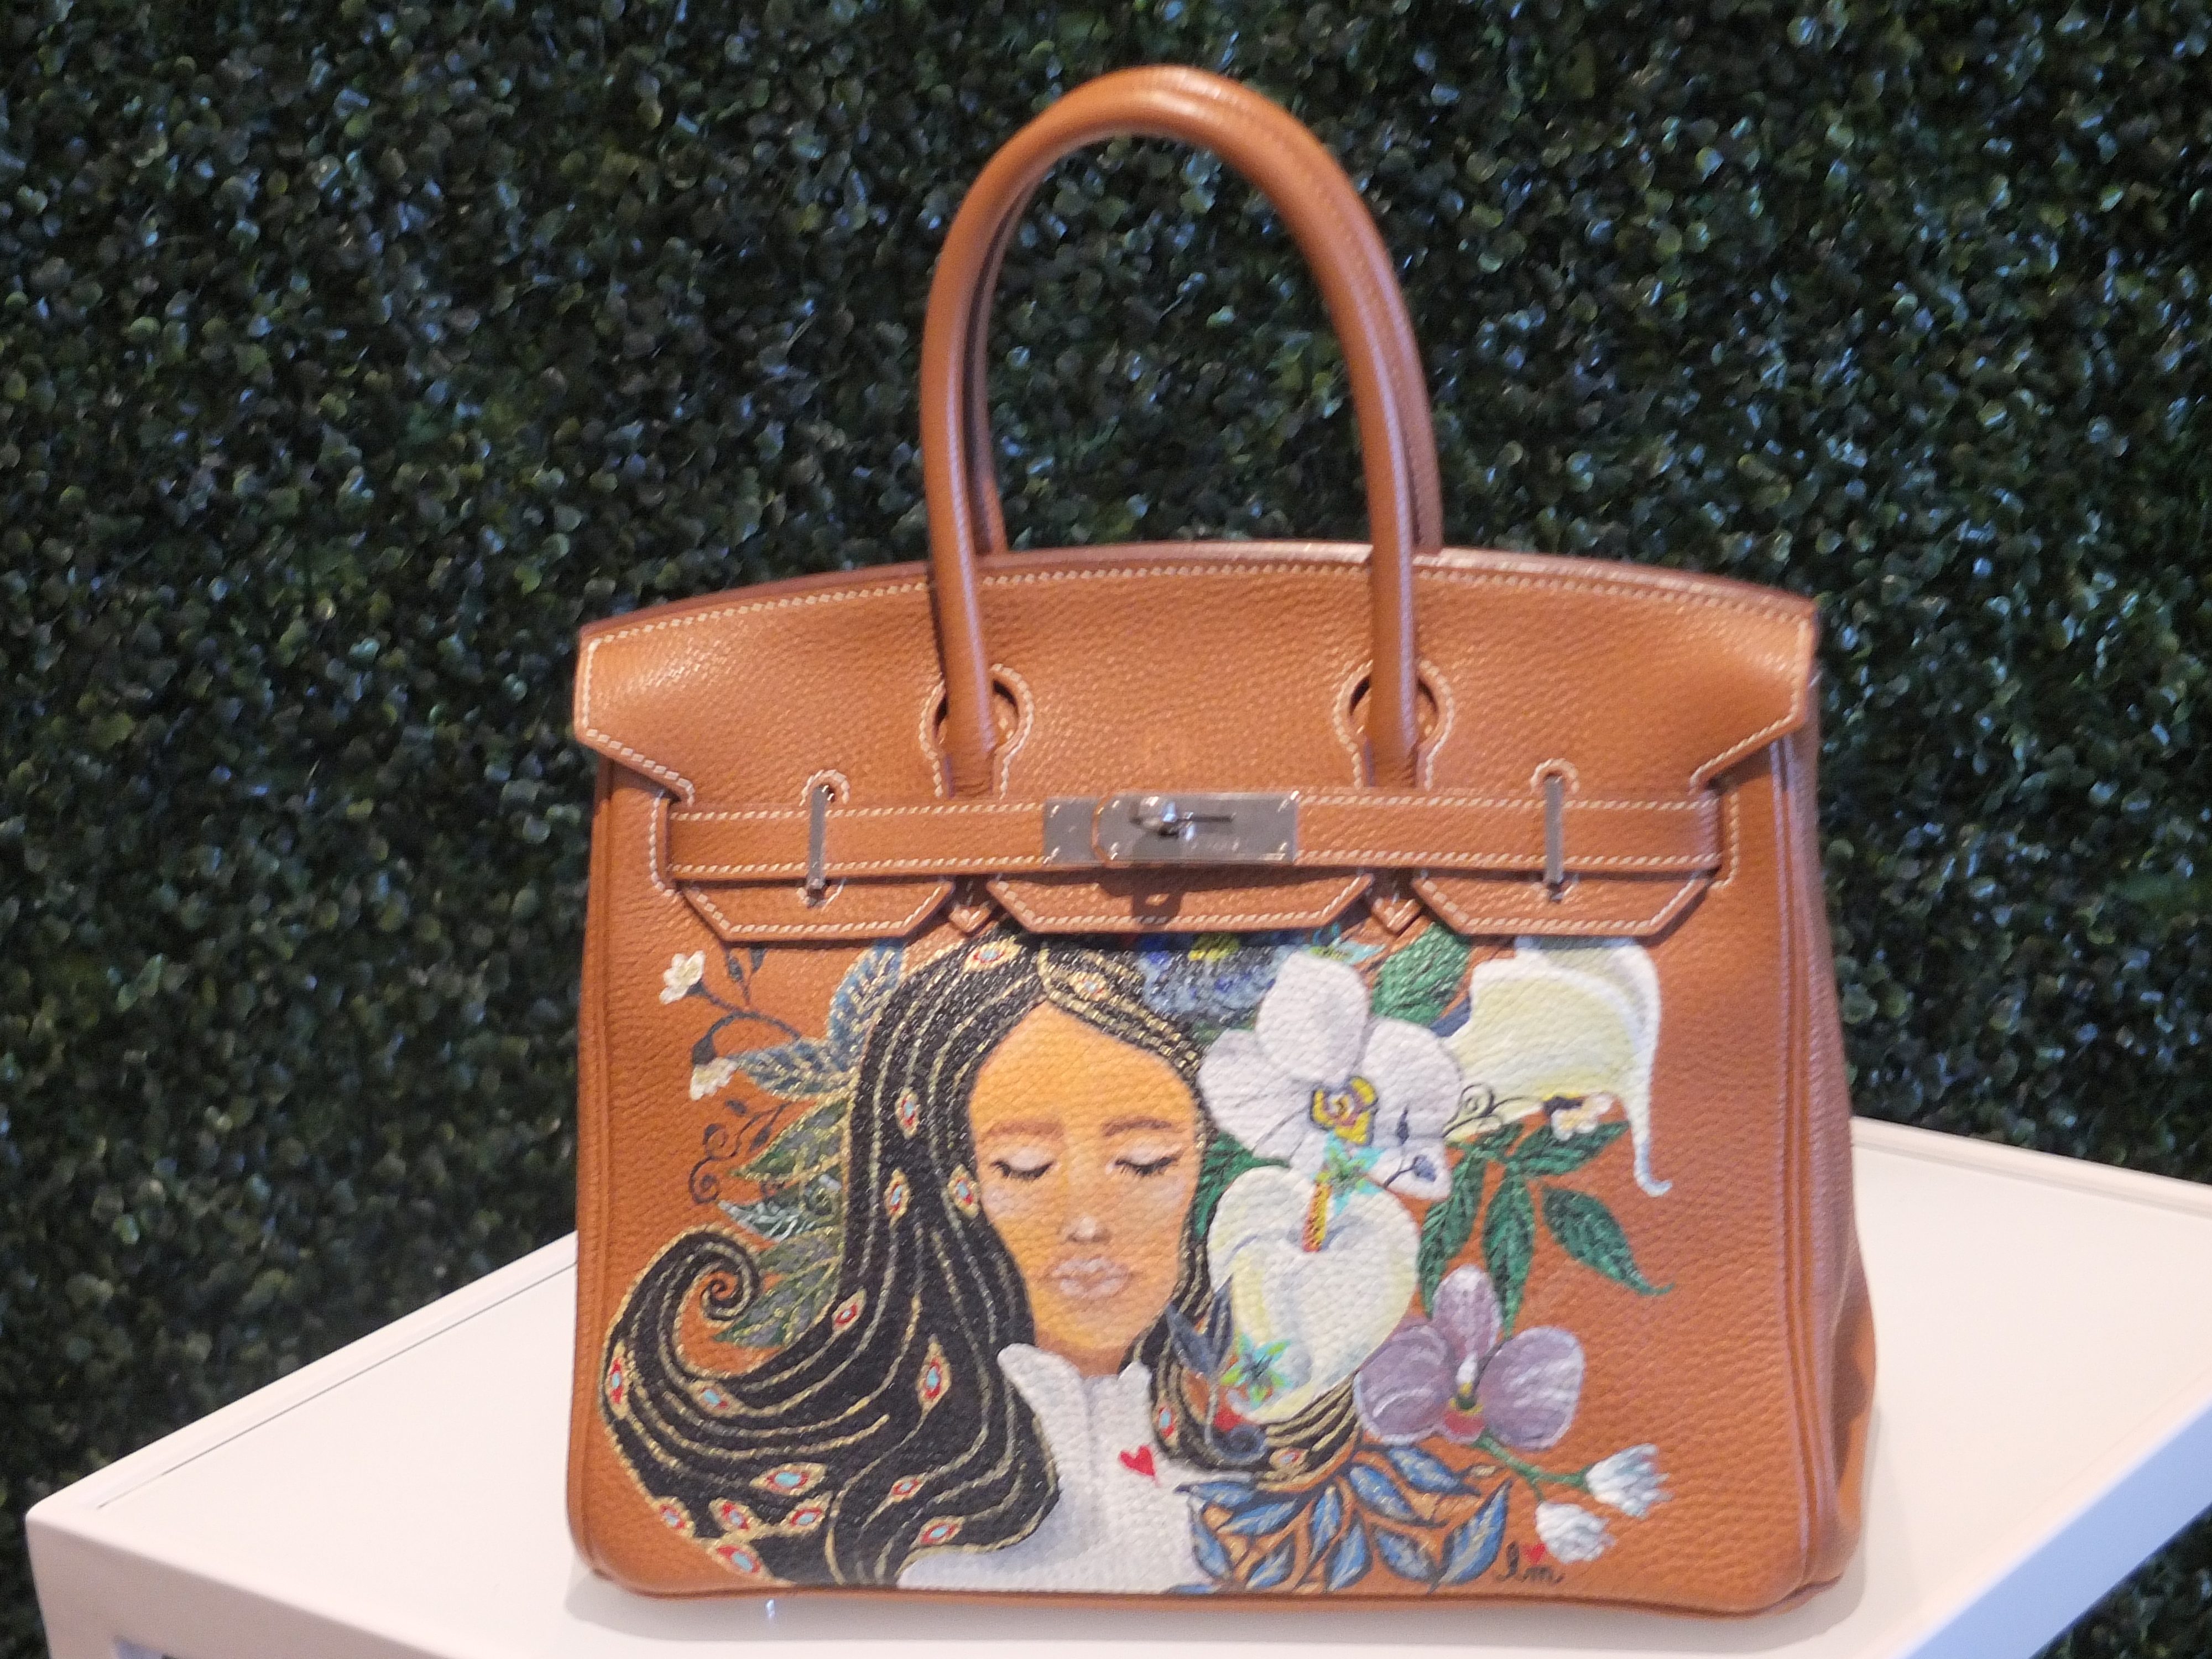 LOOK: Heart Evangelista Shows Off Hand-Painted Louis Vuitton Bag - When In  Manila